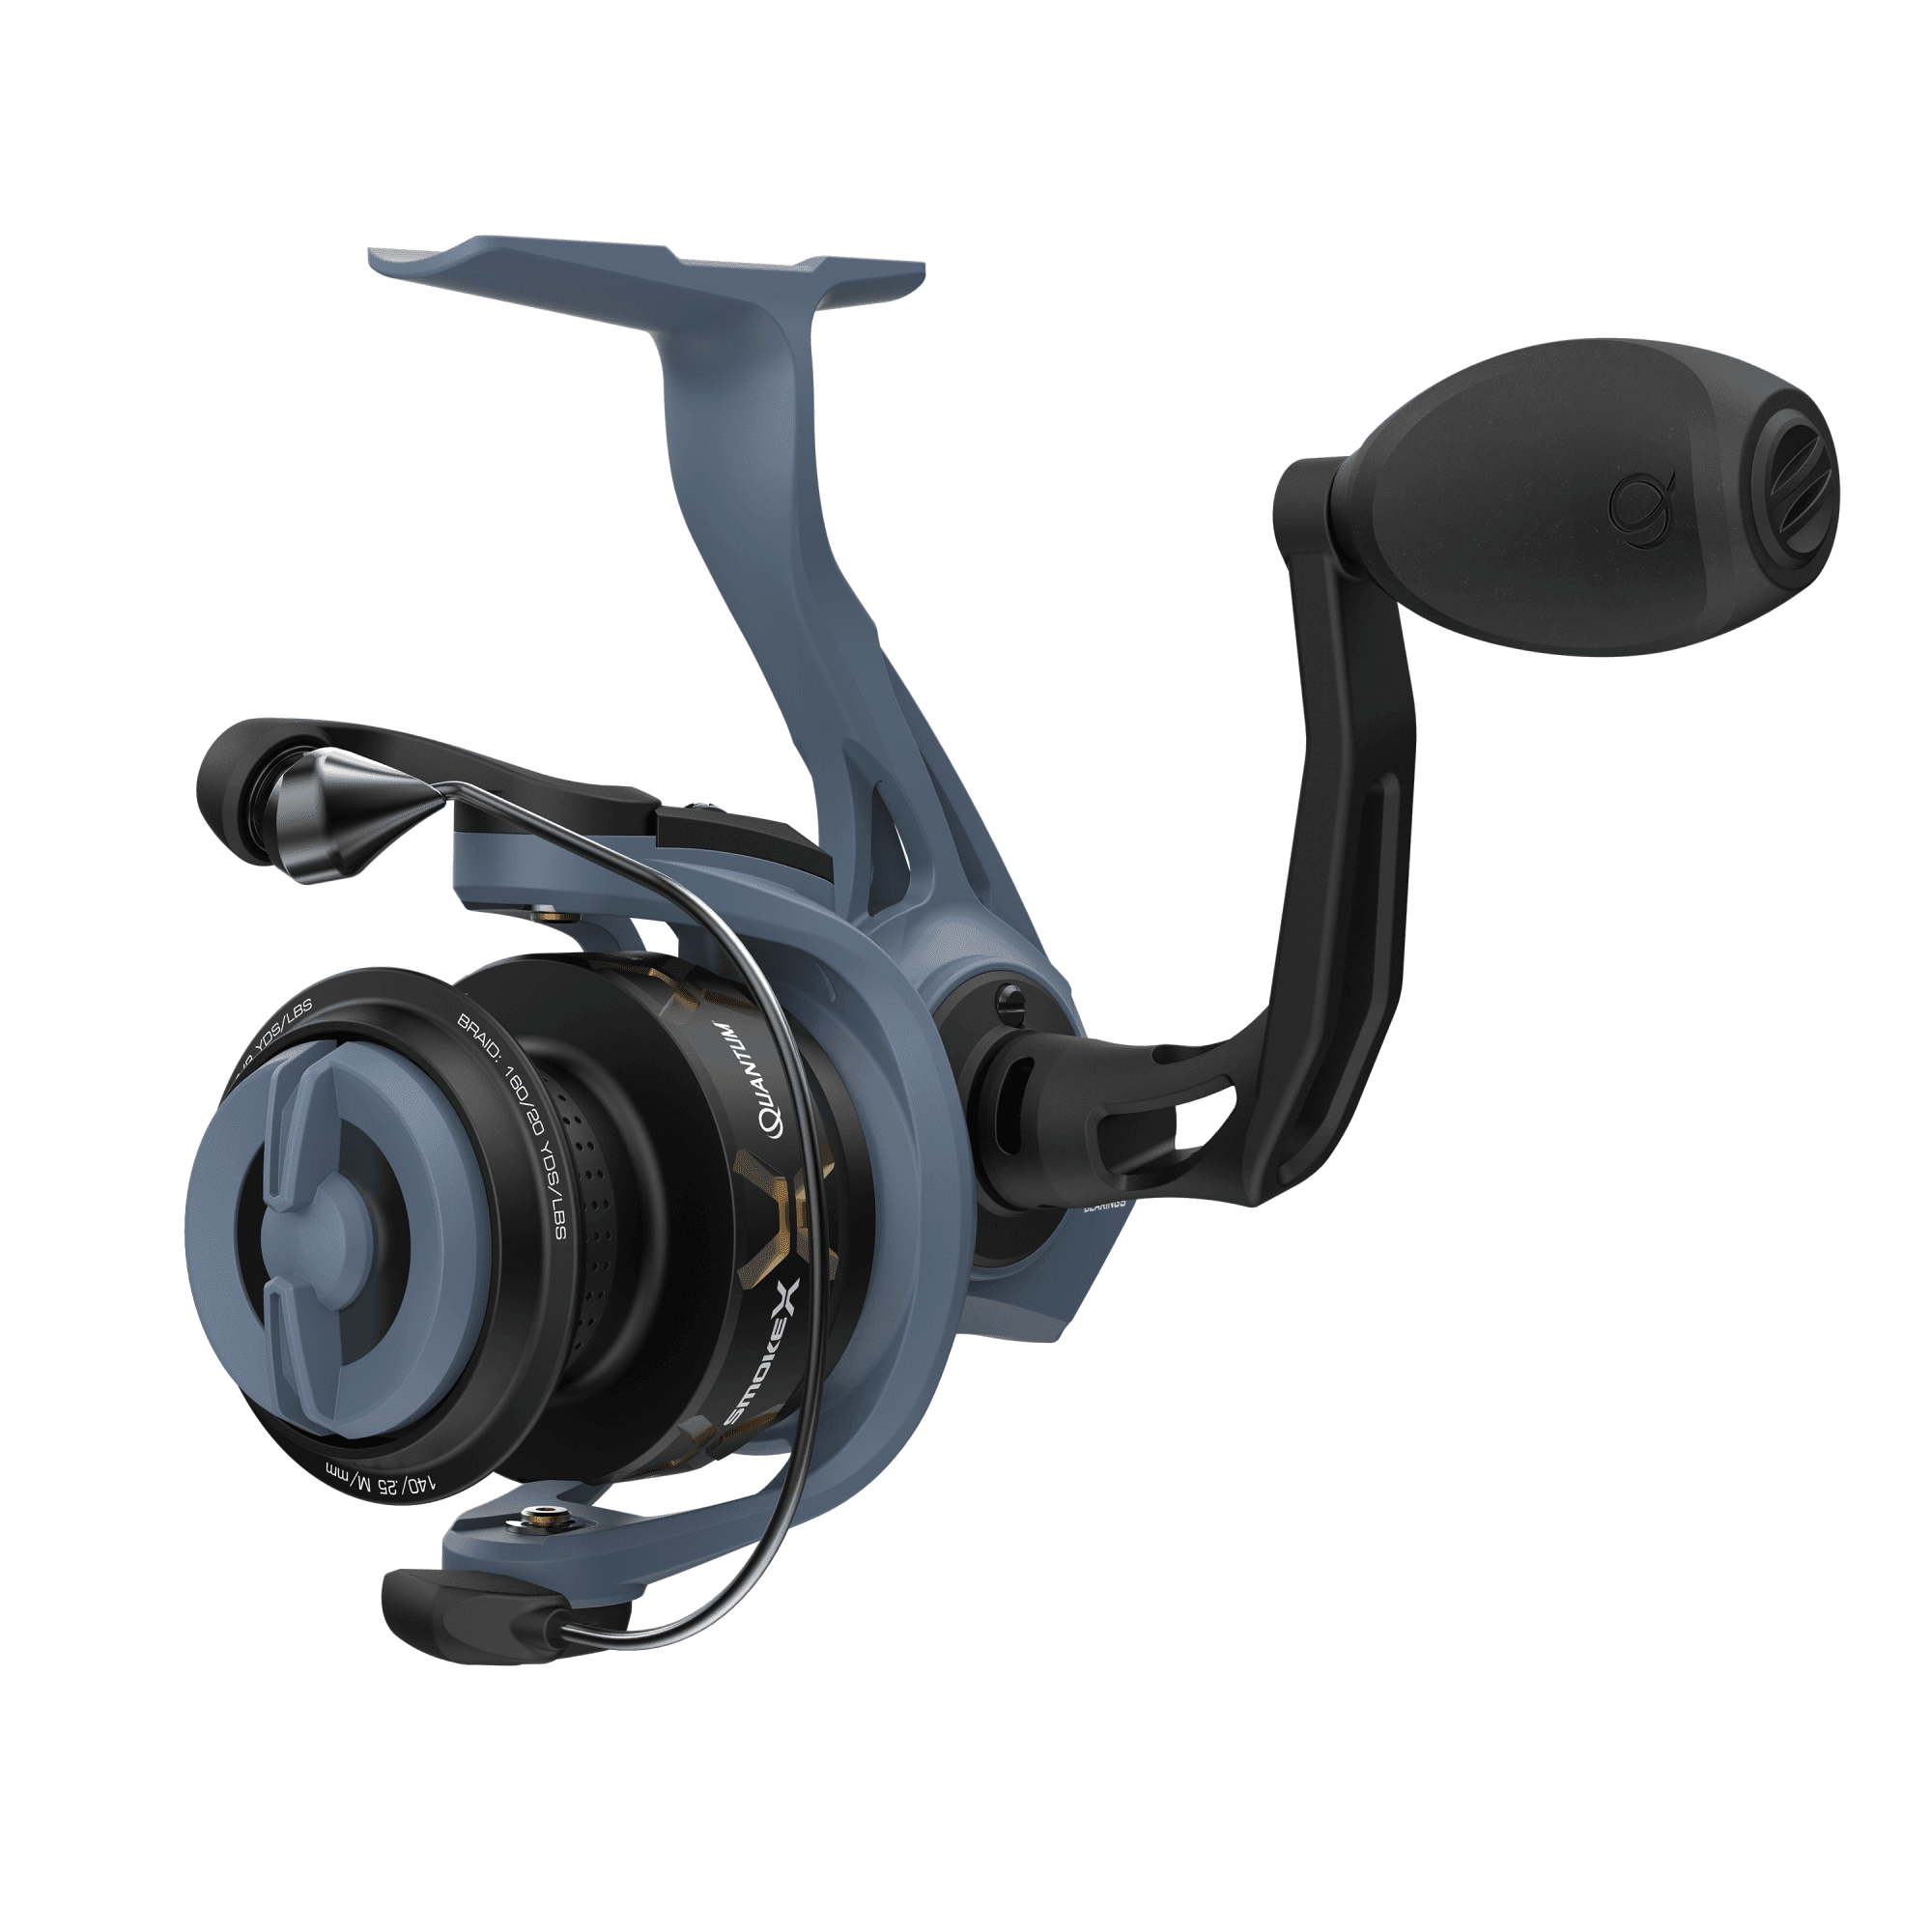 Quantum Smoke Spinning Fishing Reel, Size 40 Reel, Changeable Right- or  Left-Hand Retrieve, Continuous Anti-Reverse Clutch with NiTi Indestructible  Bail, SCR Alloy Frame, 6.0:1 Gear Ratio, Black 